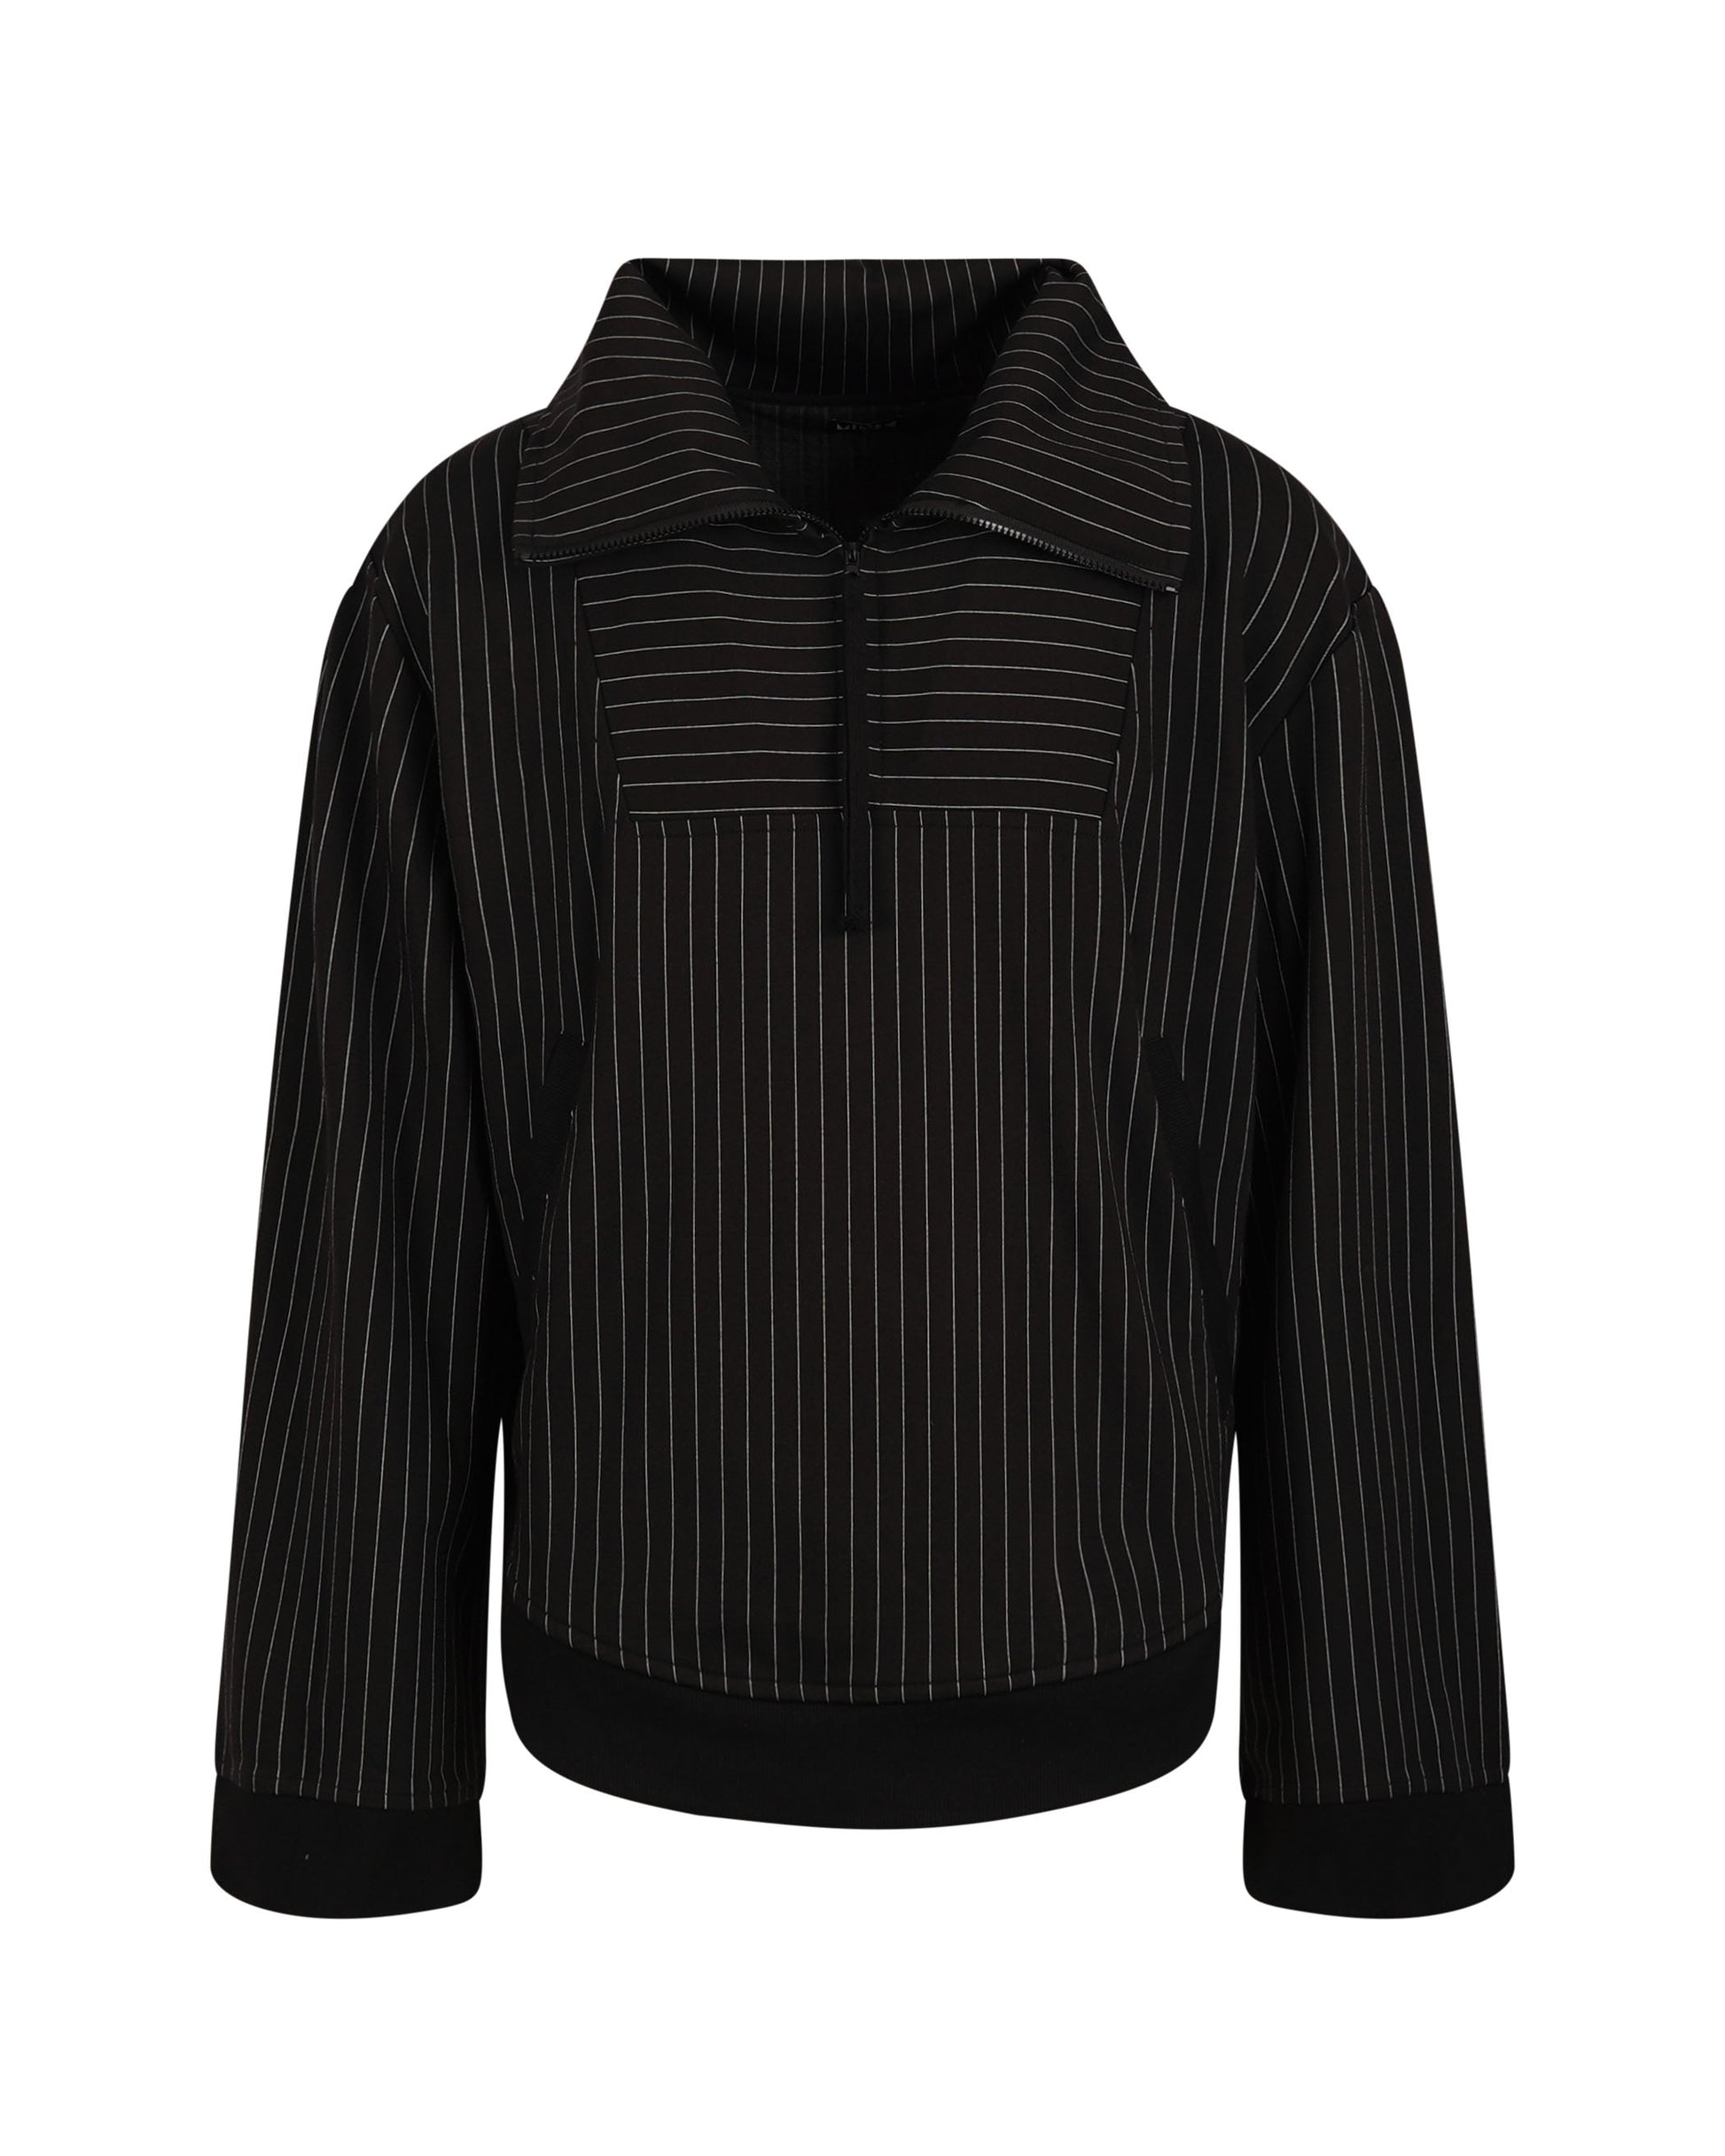 Flat Lay of Pinstripe Medio Pullover Sweatshirt by Mind Less